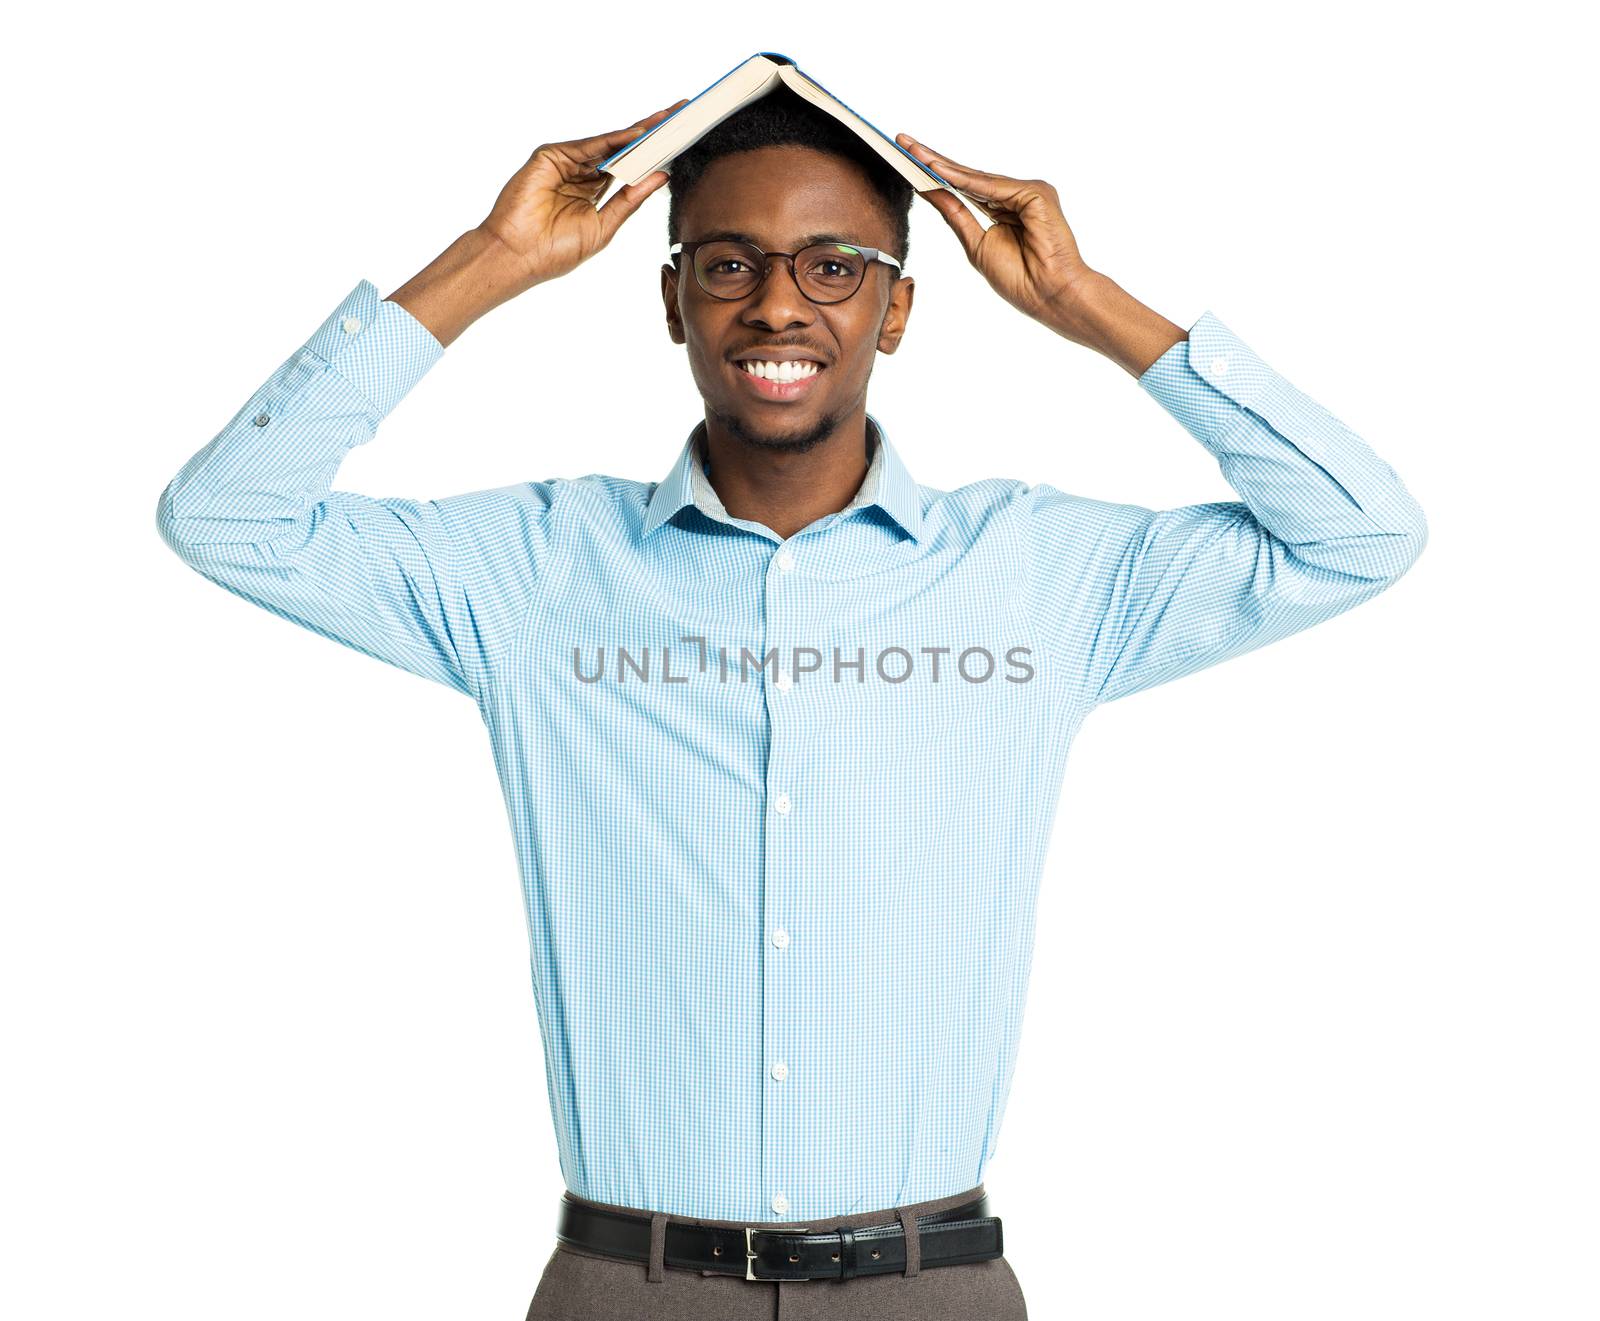 Happy african american college student with book on his head standing on white background